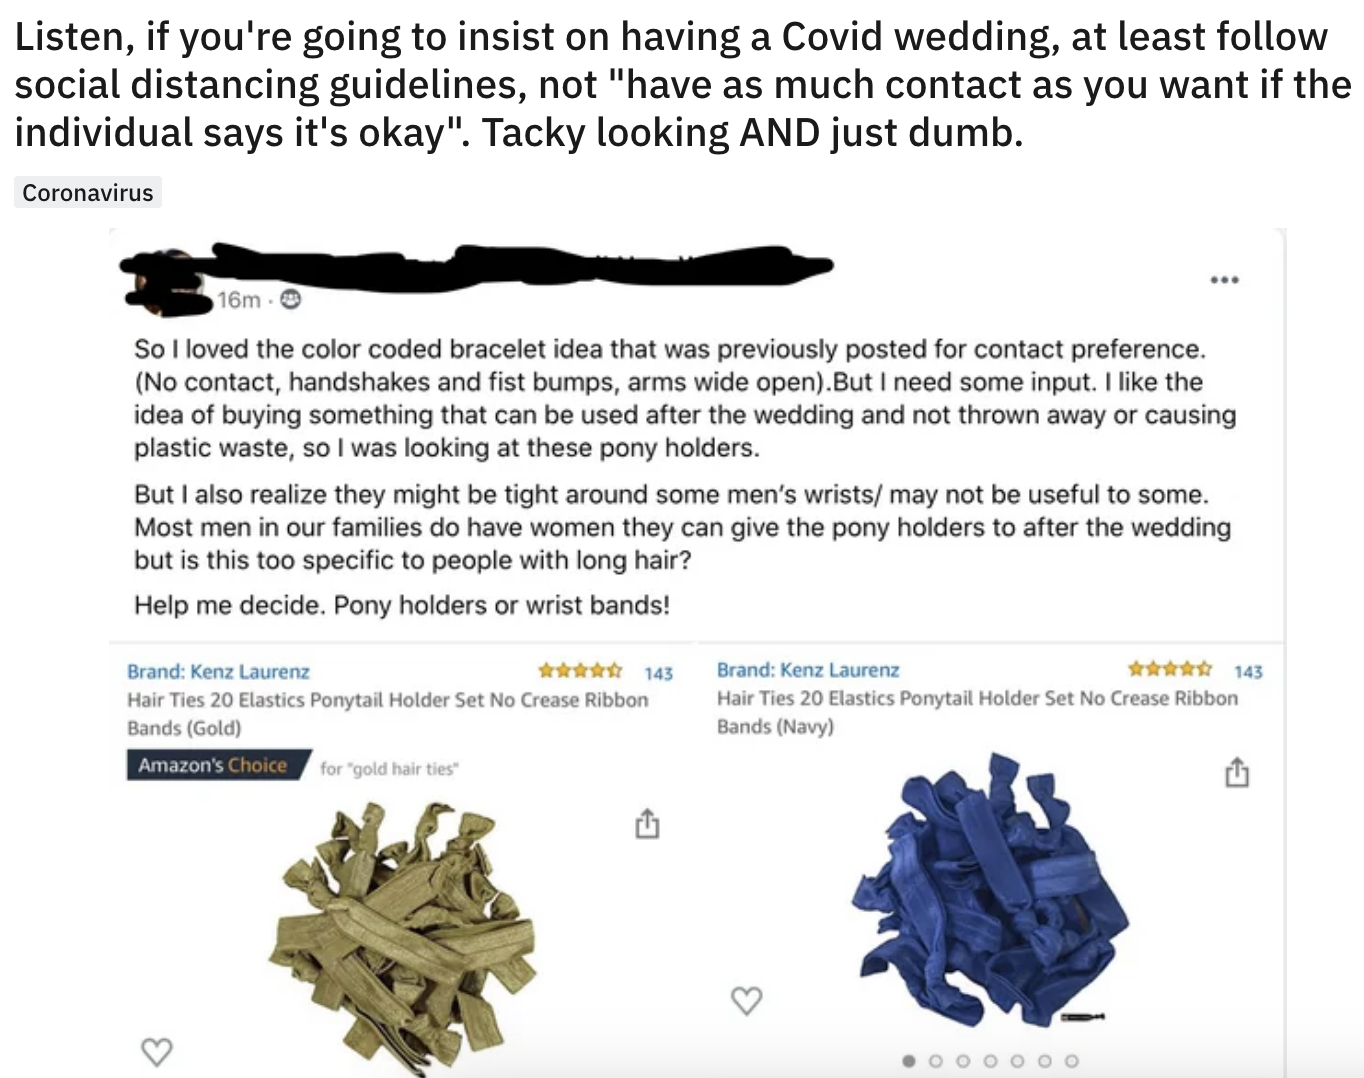 A social media post asks wedding guests to buy one of two hair ties to indicate if you want to social distance or not